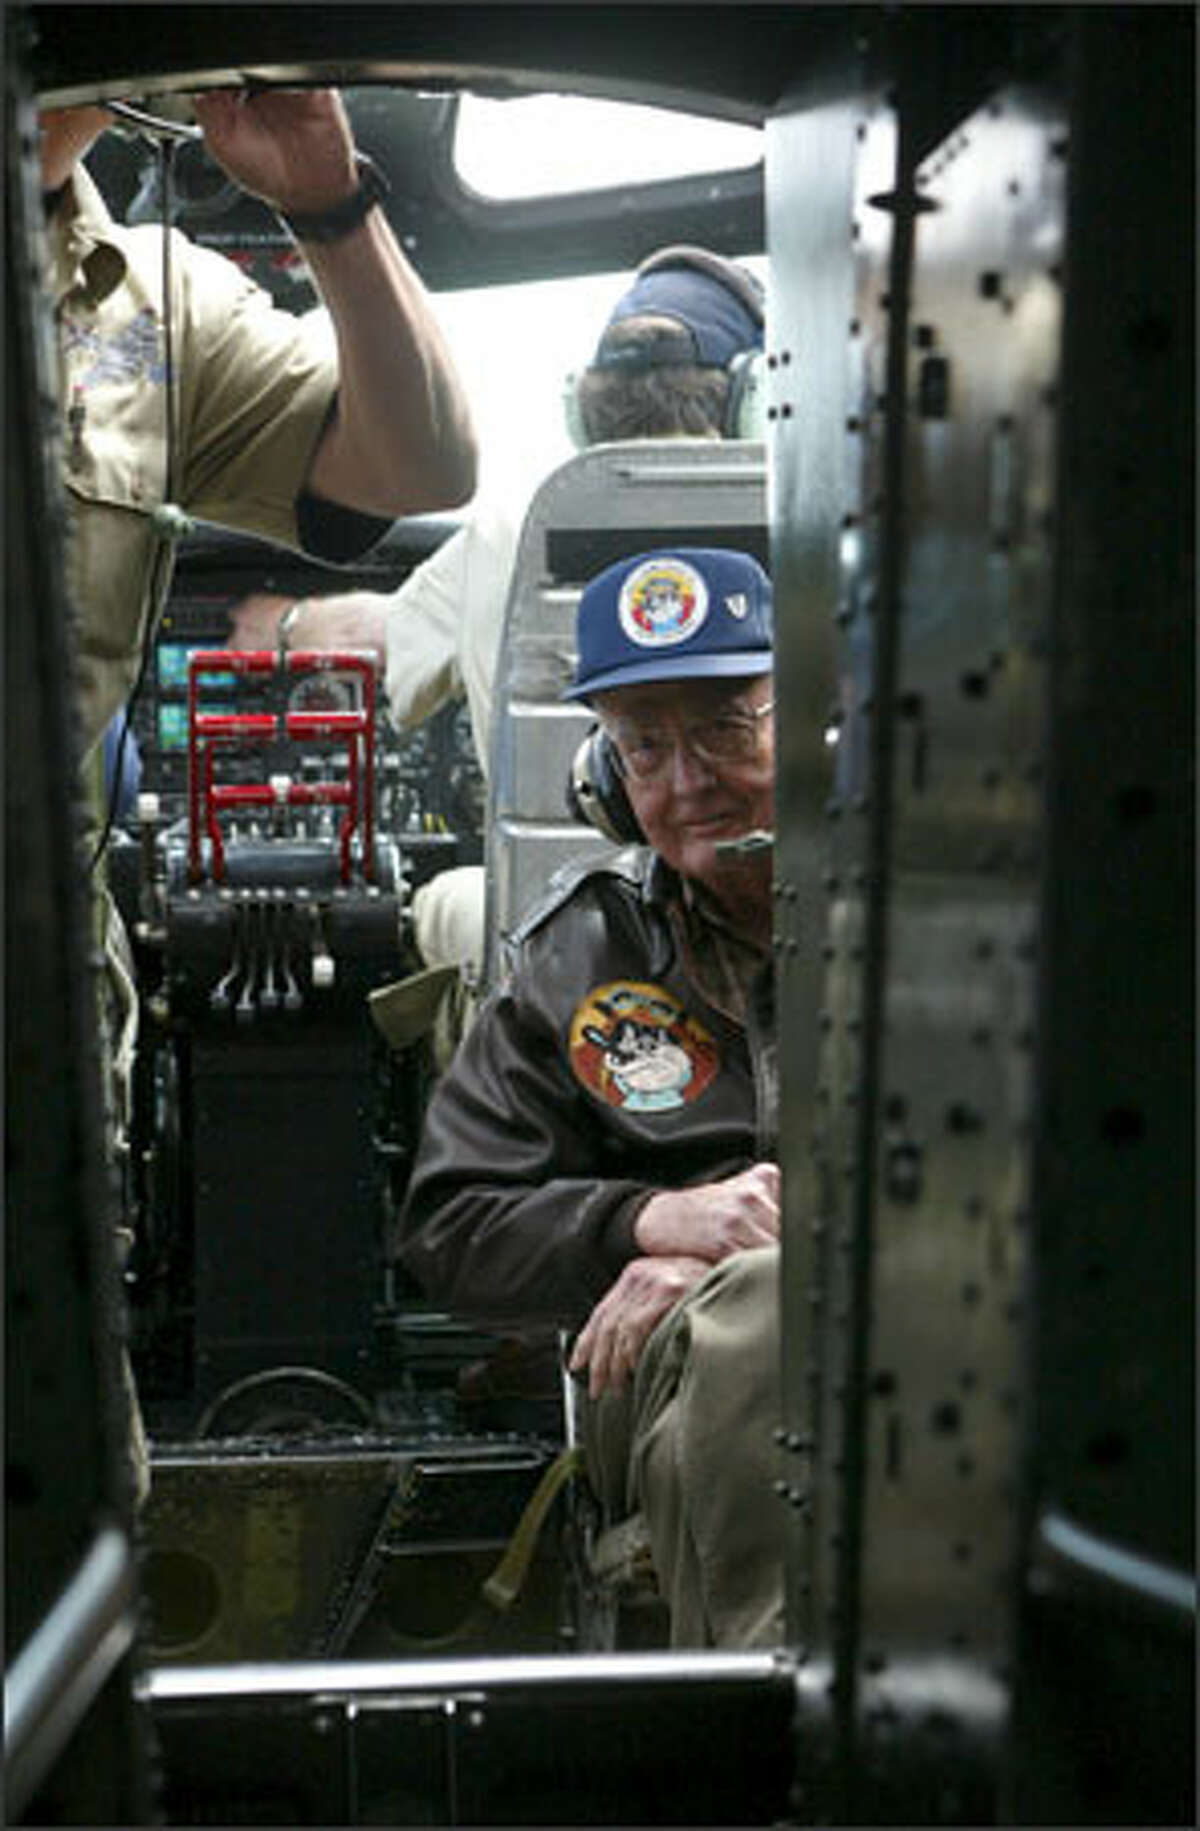 Russ Reed, 82, a B-17 pilot in the war, sits behind bomber pilots during a flight Wednesday. Reed, who flew with the 398th Bomb Group in the 603rd Squadron, was shot down in 1944 on his fifth mission over Germany and spent four months as a prisoner of war. Another guest for the nostalgic flight Wednesday was 90-year-old Ike Alhadeff. He also is a former B-17 pilot who was shot down in 1944 over Germany. Between 1935 and 1945, 12,731 B-17s rolled out of Boeing, Douglas and Lockheed plants across the country, including in Seattle. The Aluminum Overcast, which is painted in the colors of the 389th Bomb Group, was built in 1945 but was delivered to the Army Air Corps too late to see service in the war.